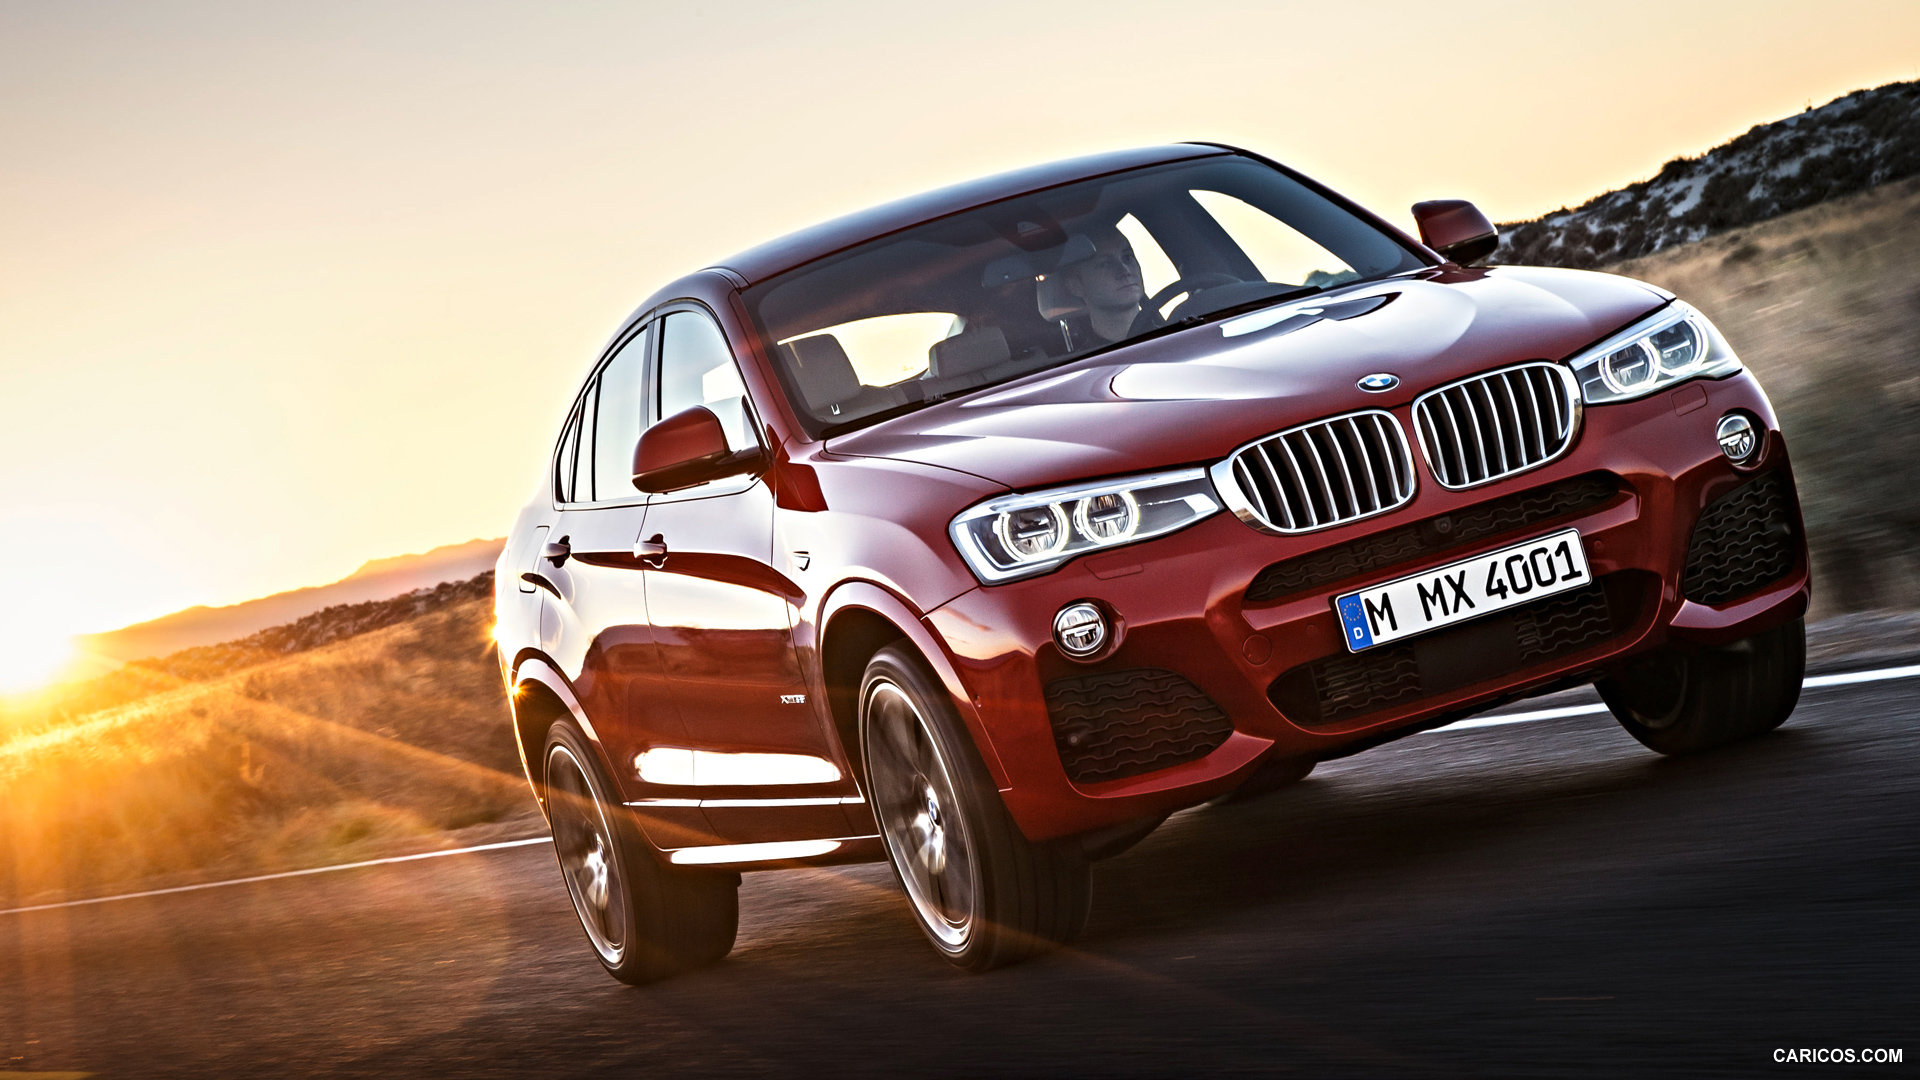 Bmw X4 Wallpapers Hd For Desktop Backgrounds